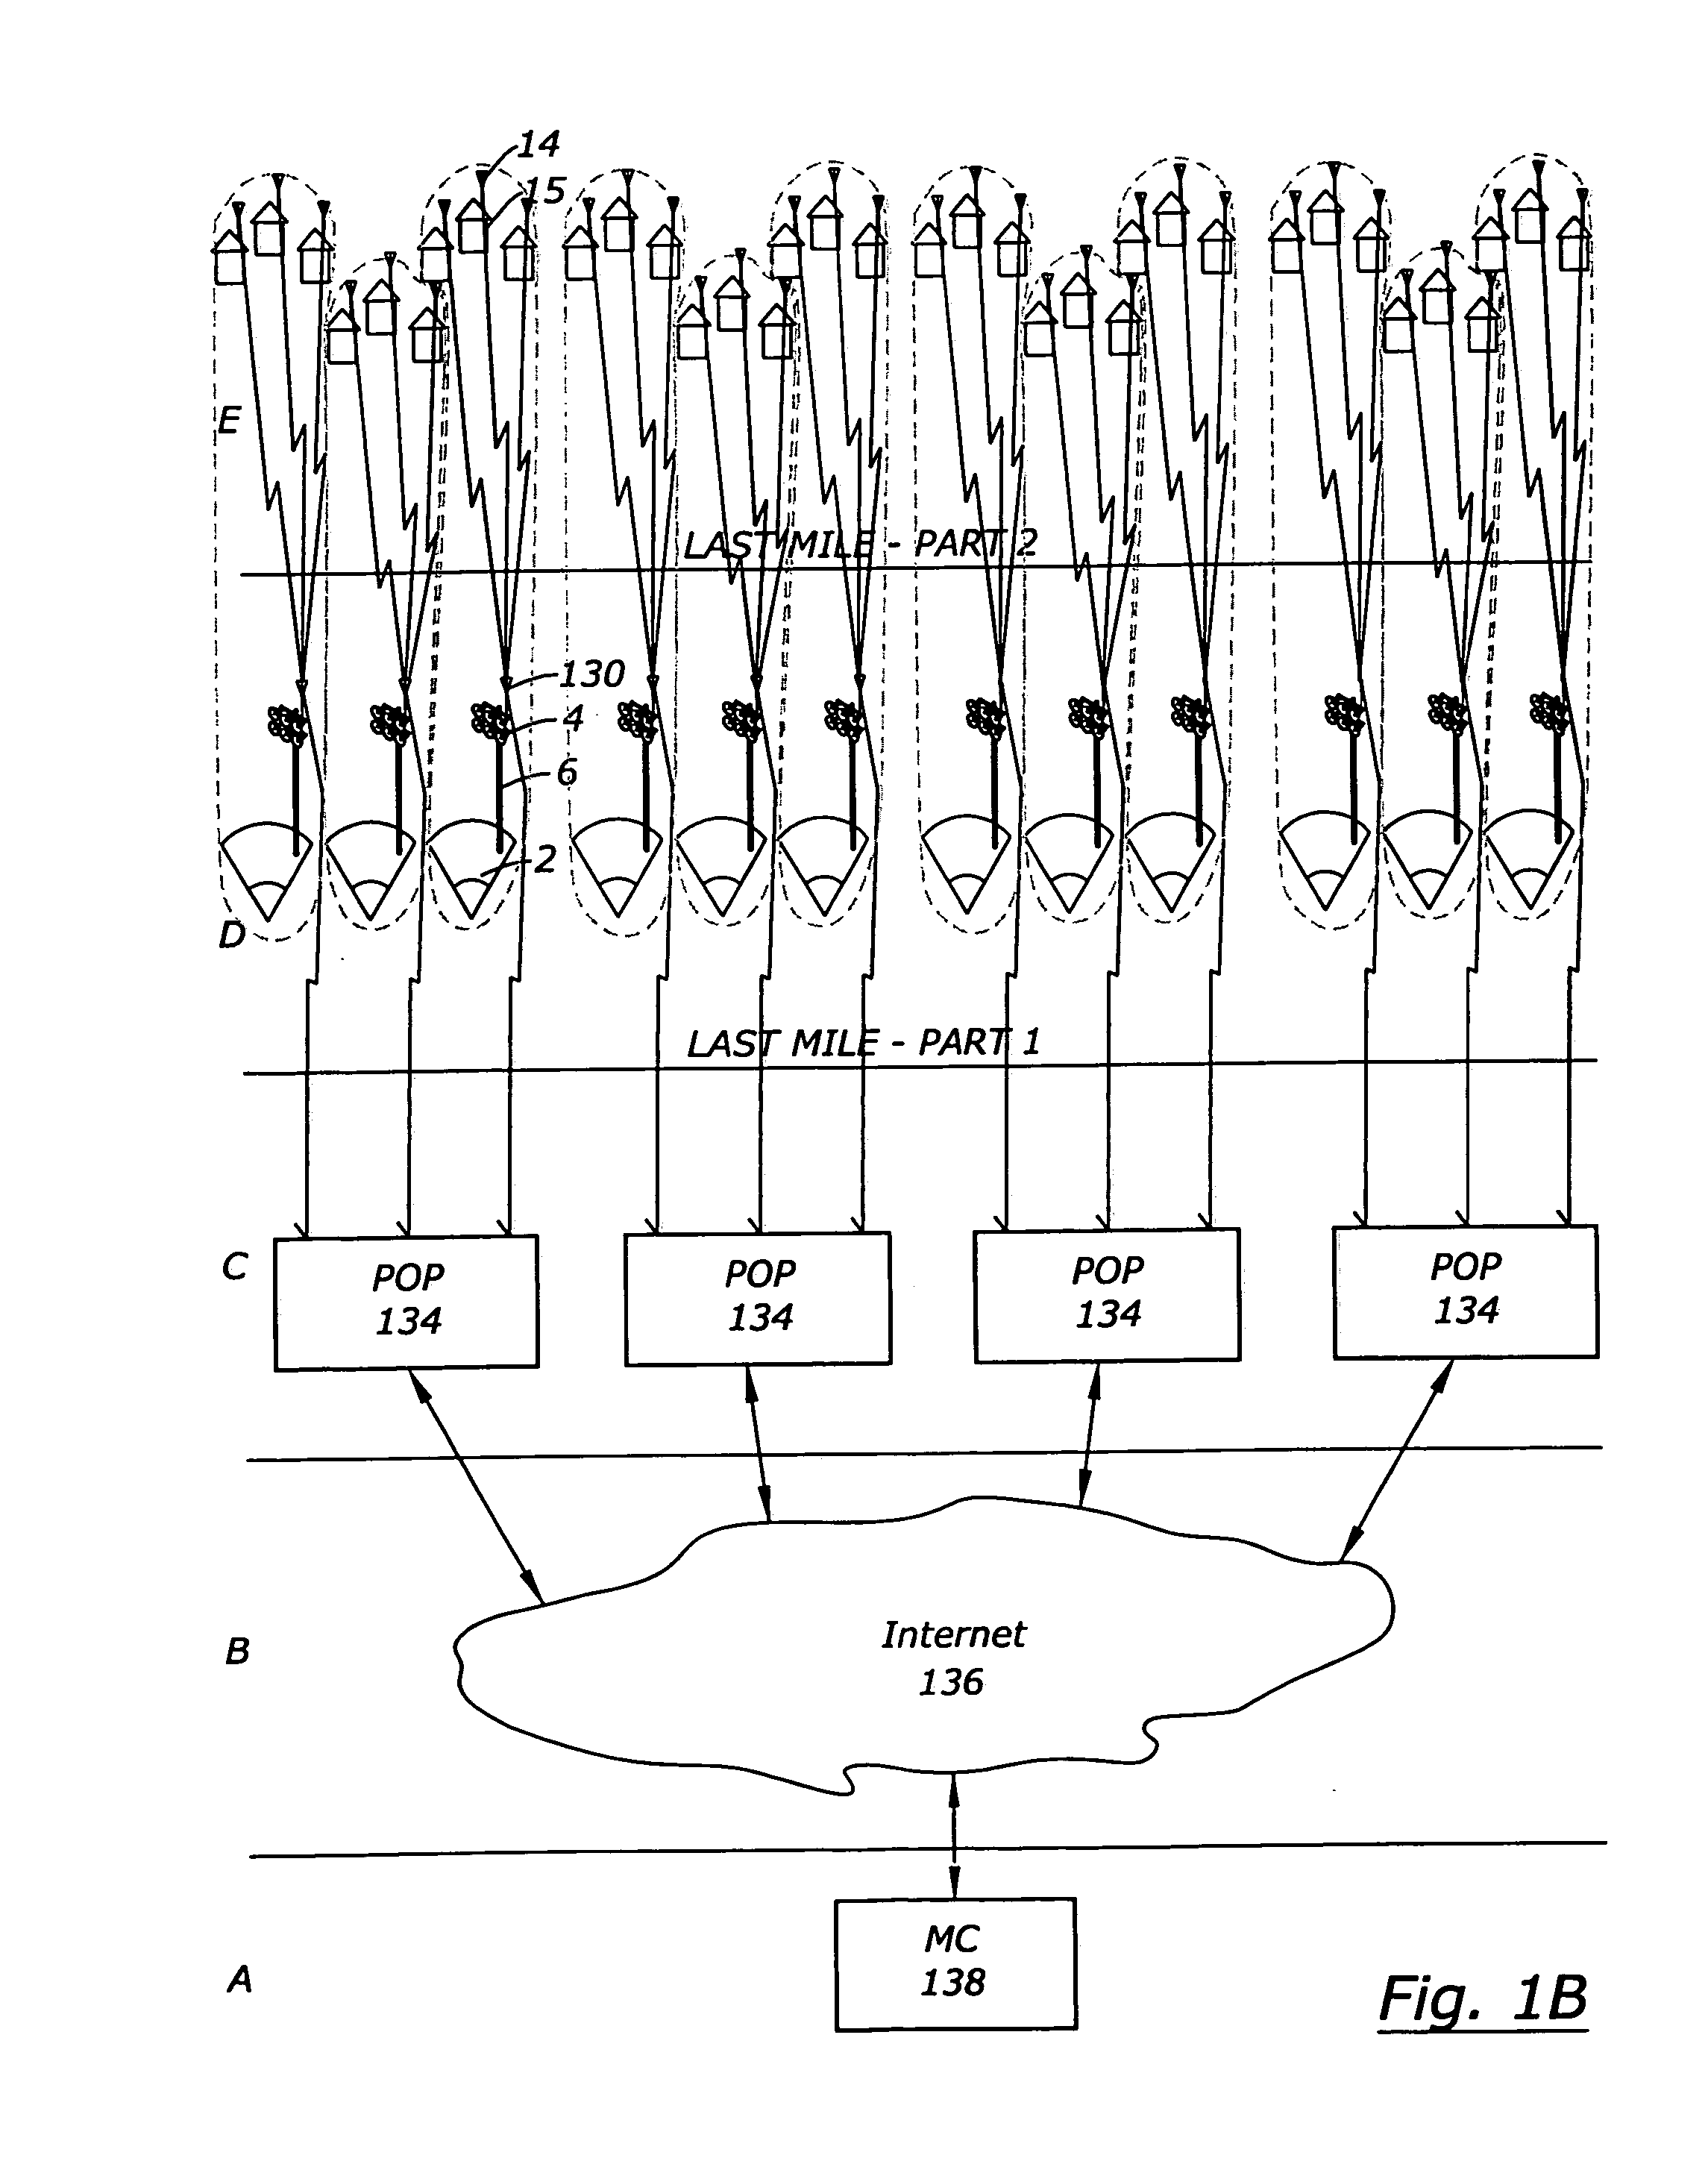 Apparatus, system, and method for wide area networking through a last mile infrastructure having a different primary purpose and apparatus and method for electronic scoring, score reporting, and broadcasting